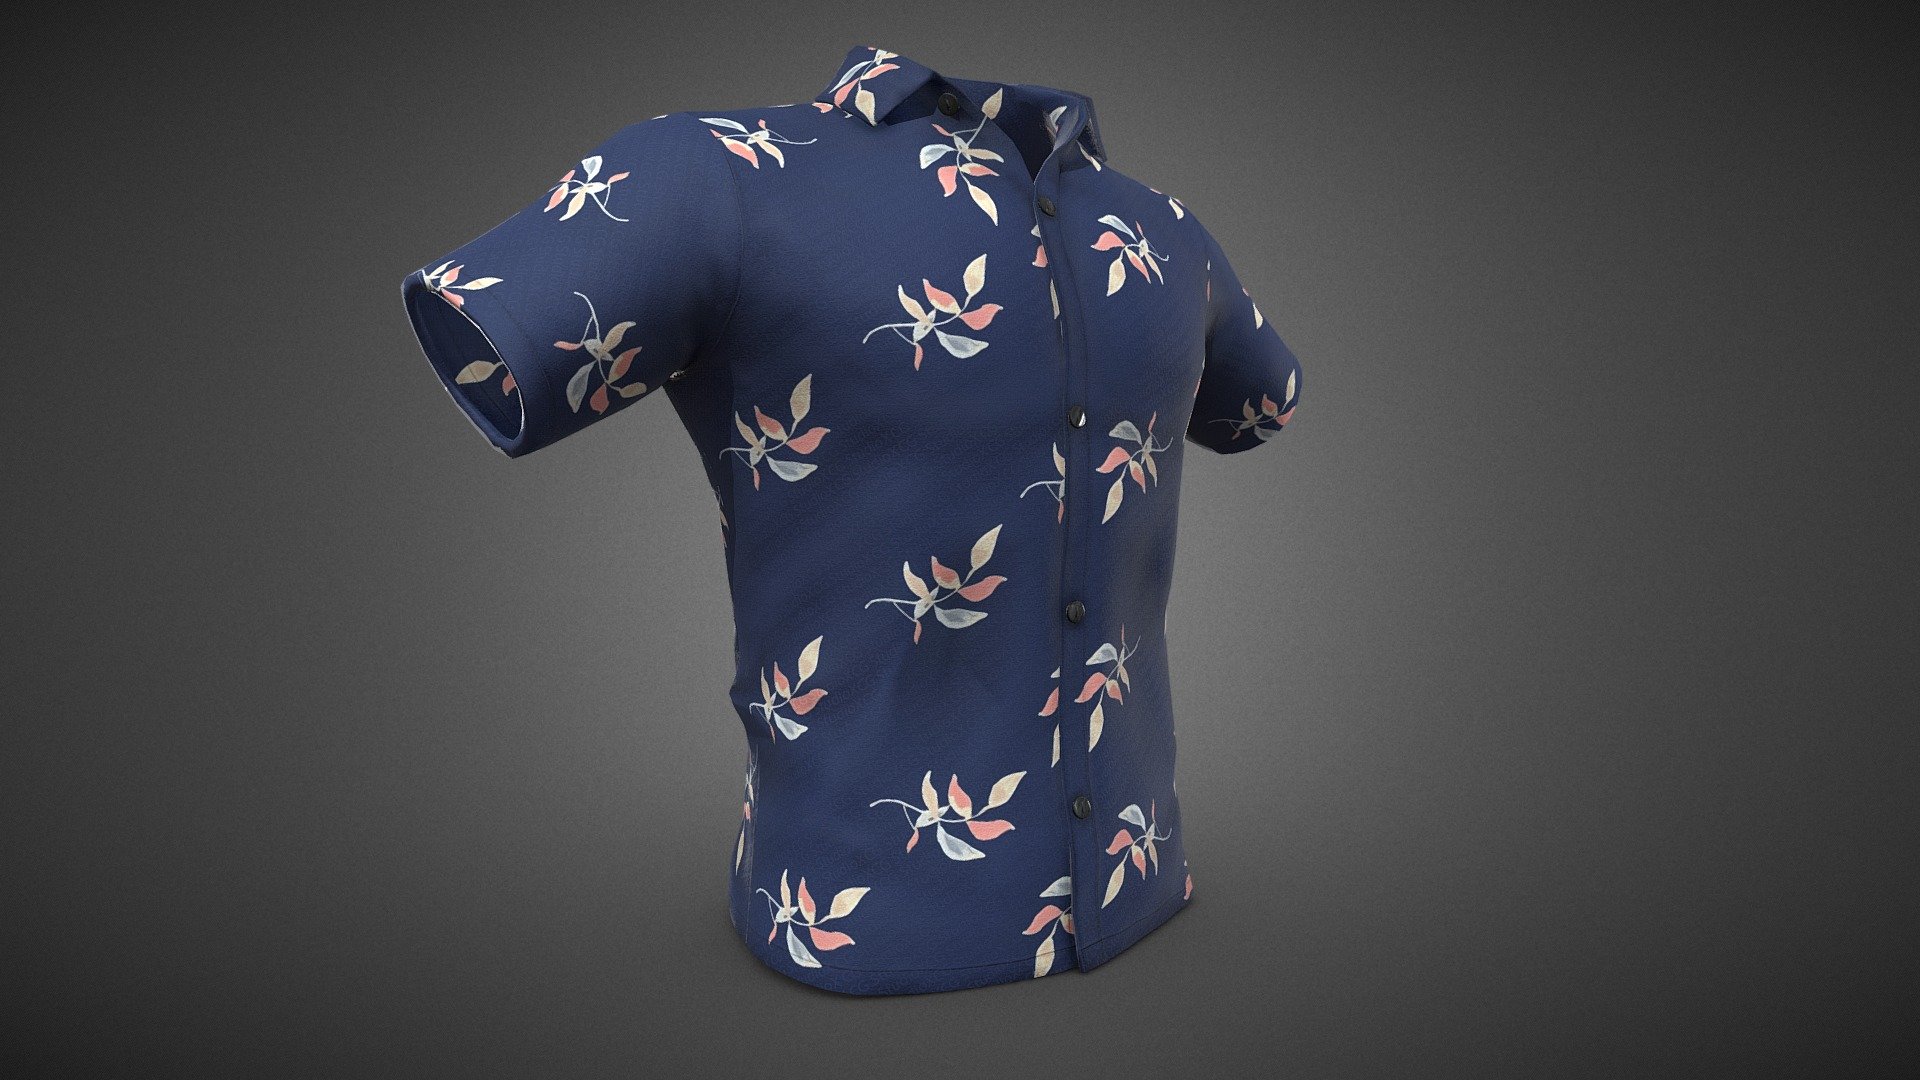 CG StudioX Present :
Summer Shirt 2 lowpoly/PBR


This is Summer Shirt 2 Comes with Specular and Metalness PBR.
The photo been rendered using Marmoset Toolbag 4 (real time game engine )

Features :

Comes with Specular and Metalness PBR 4K texture .
Good topology.
Low polygon geometry.
The Model is prefect for game for both Specular workflow as in Unity and Metalness as in Unreal engine .
The model also rendered using Marmoset Toolbag 4 with both Specular and Metalness PBR and also included in the product with the full texture.
The texture can be easily adjustable .

Texture :

One set of UV [Albedo -Normal-Metalness -Roughness-Gloss-Specular-Ao] (4096*4096)

Files :
Marmoset Toolbag 4 ,Maya,,FBX,OBj with all the textures.


Contact me for if you have any questions.
 - Summer Shirt 2 - Buy Royalty Free 3D model by CG StudioX (@CG_StudioX) 3d model